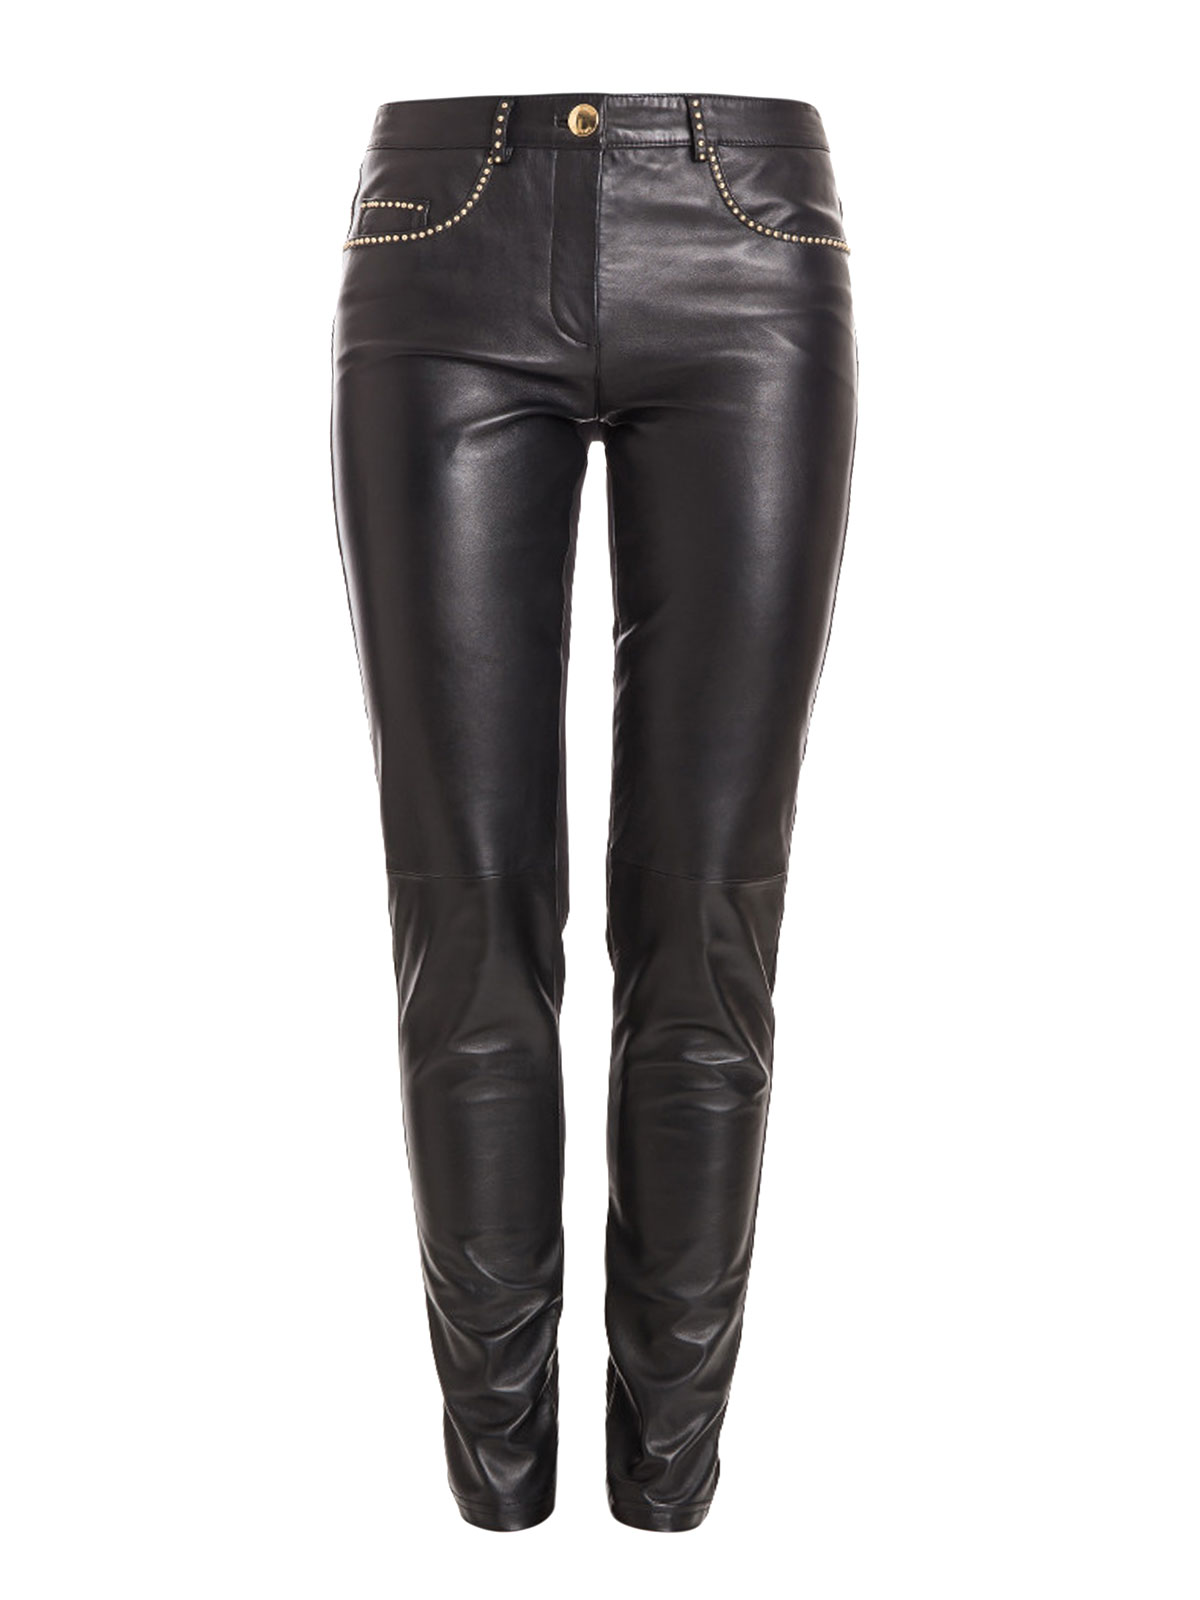 Leather trousers Moschino Boutique - Leather and fabric slim trousers -